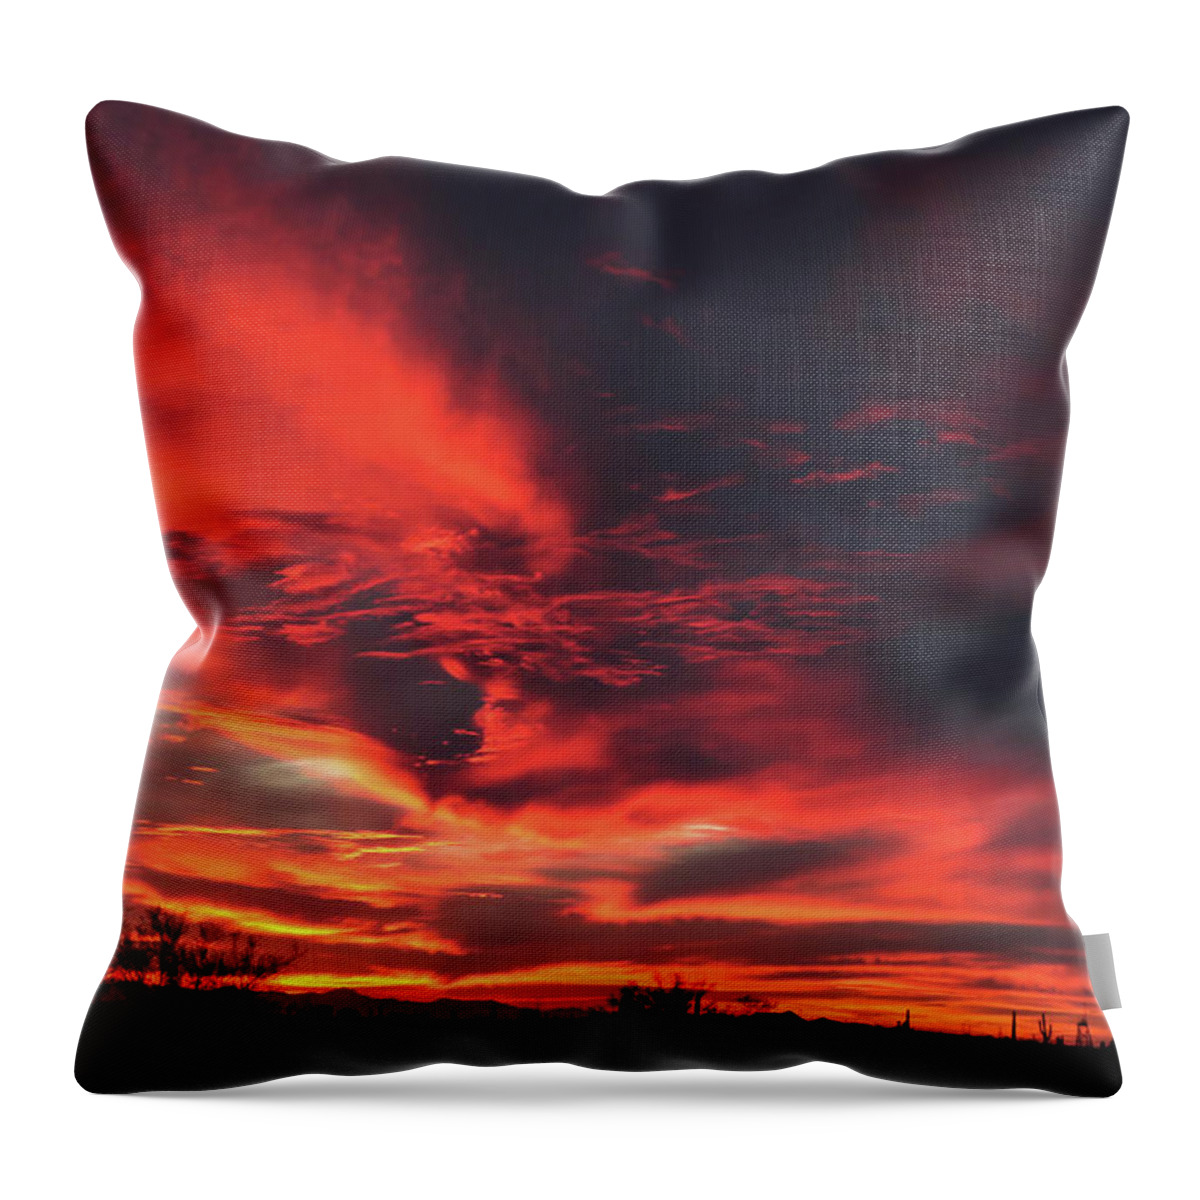 2020 Throw Pillow featuring the photograph Superstition Sunset by Dawn Richards